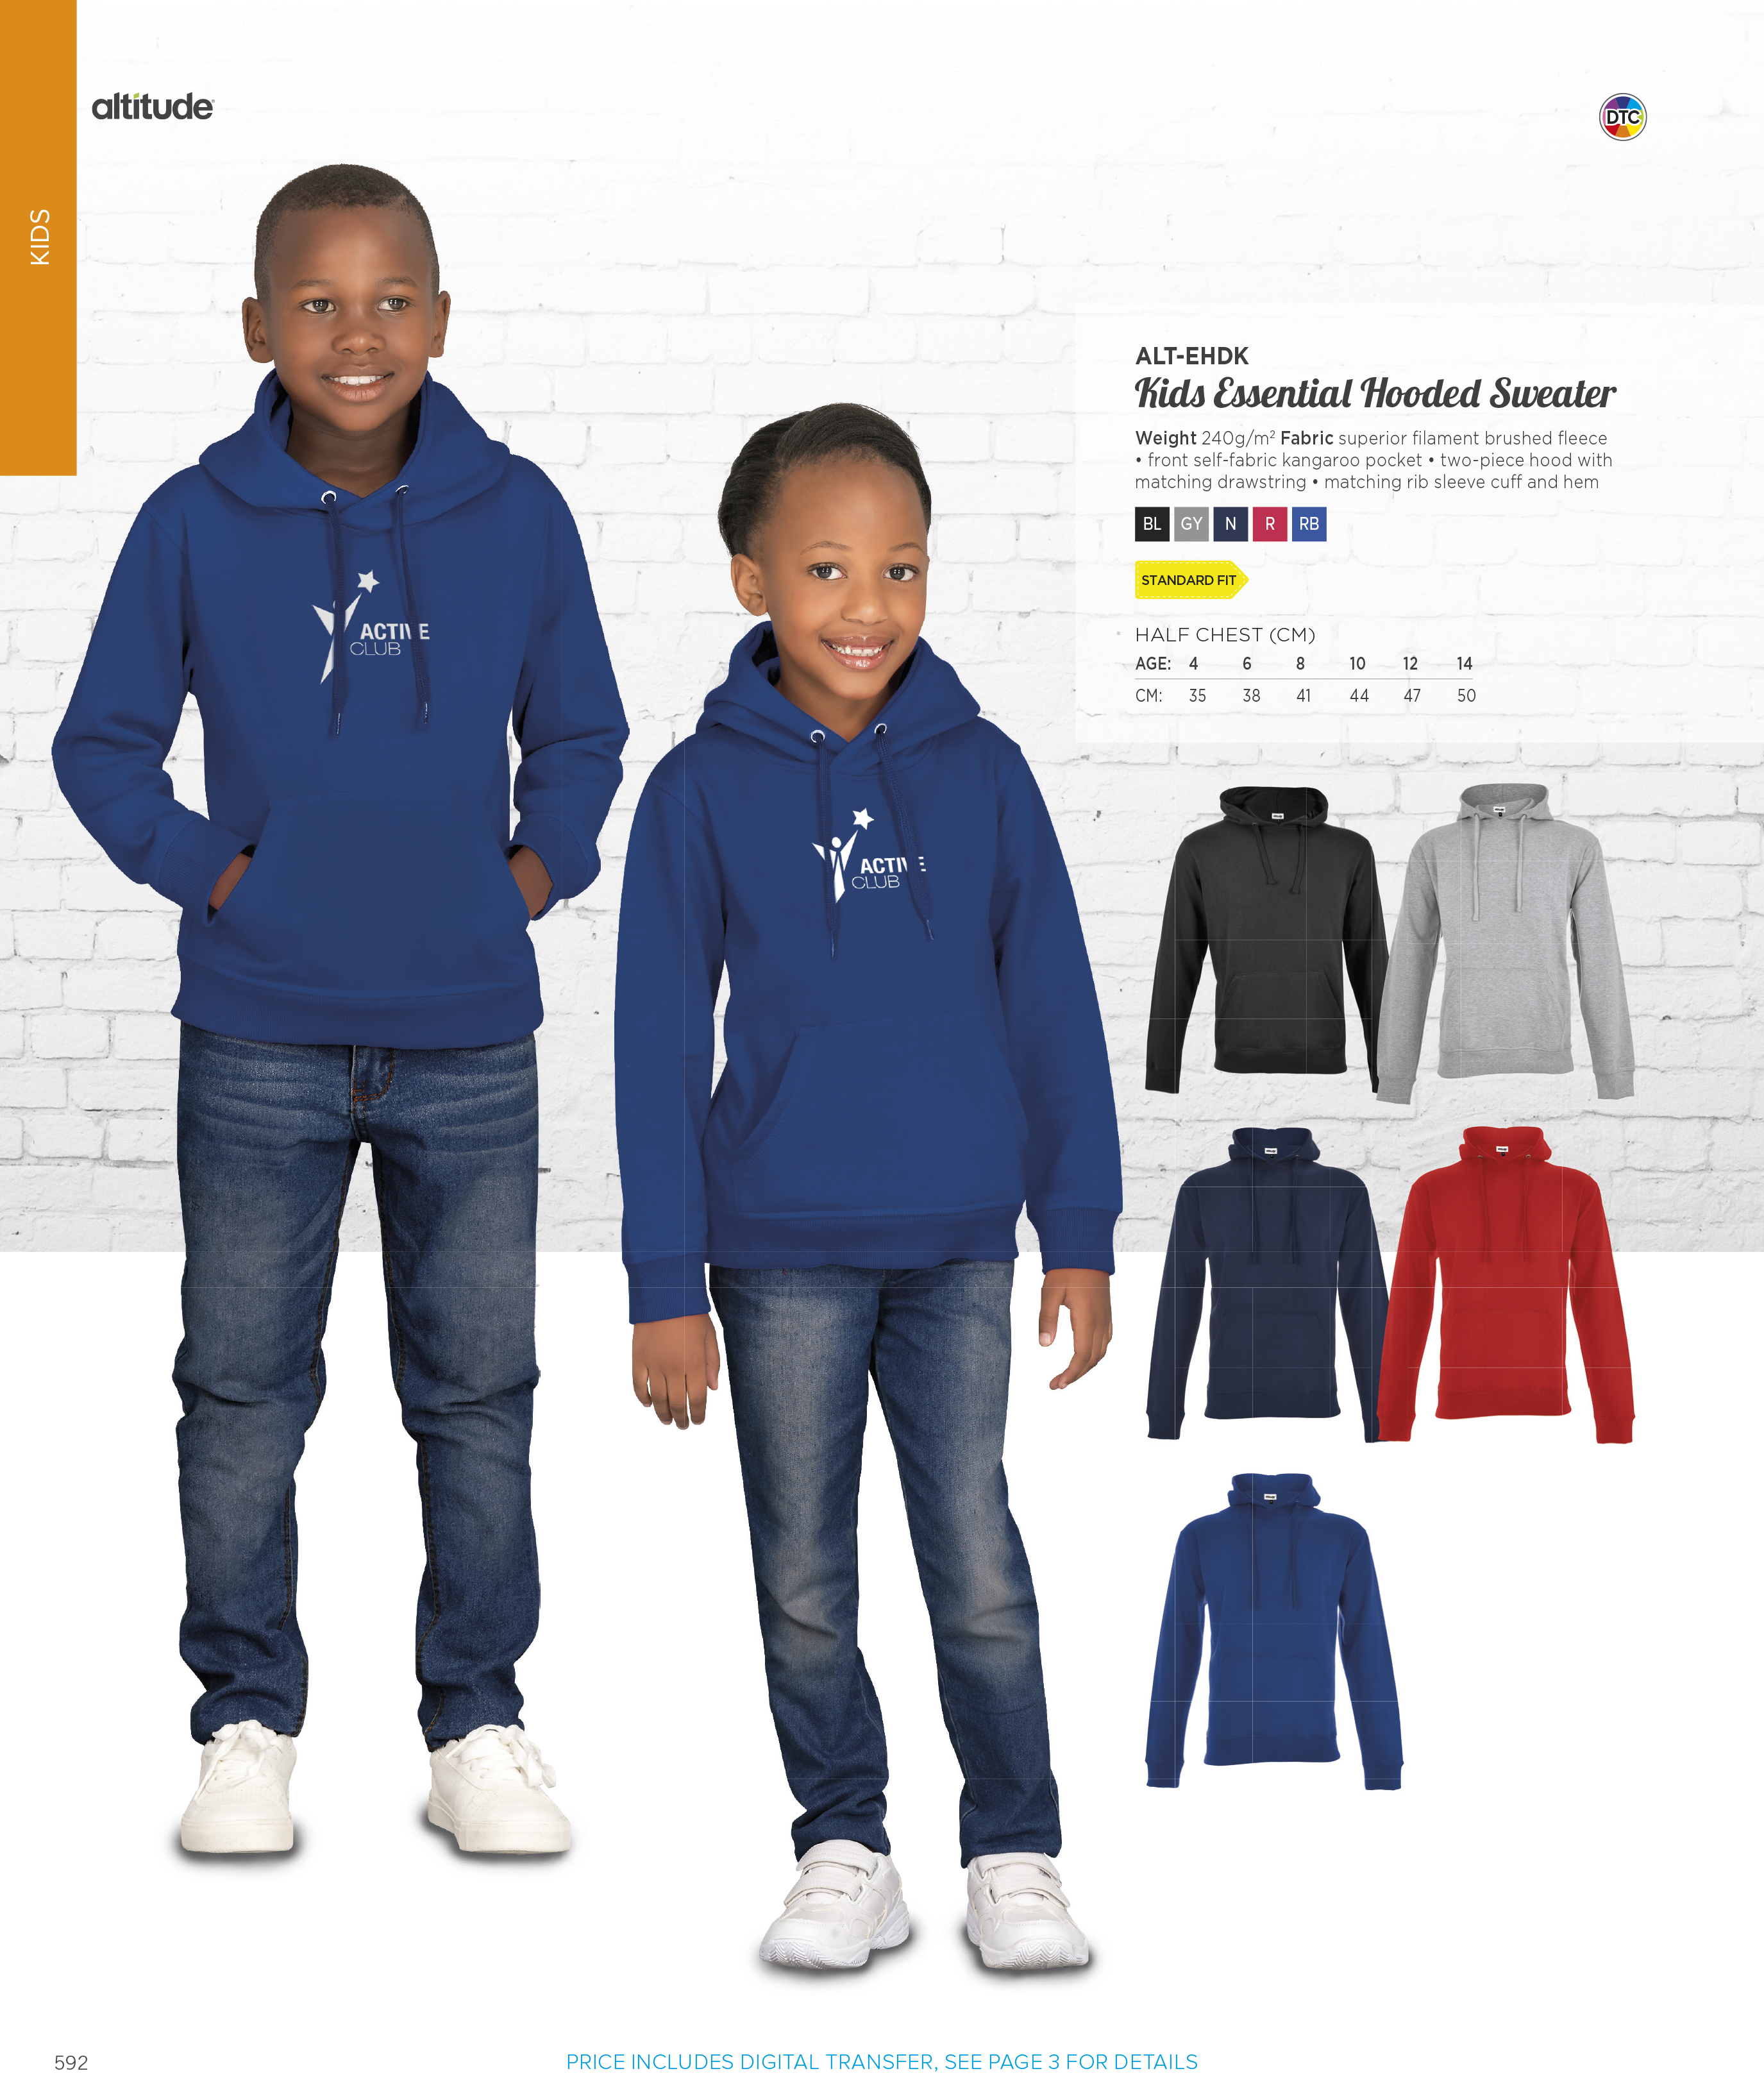 Kids Essential Hooded Sweater CATALOGUE_IMAGE